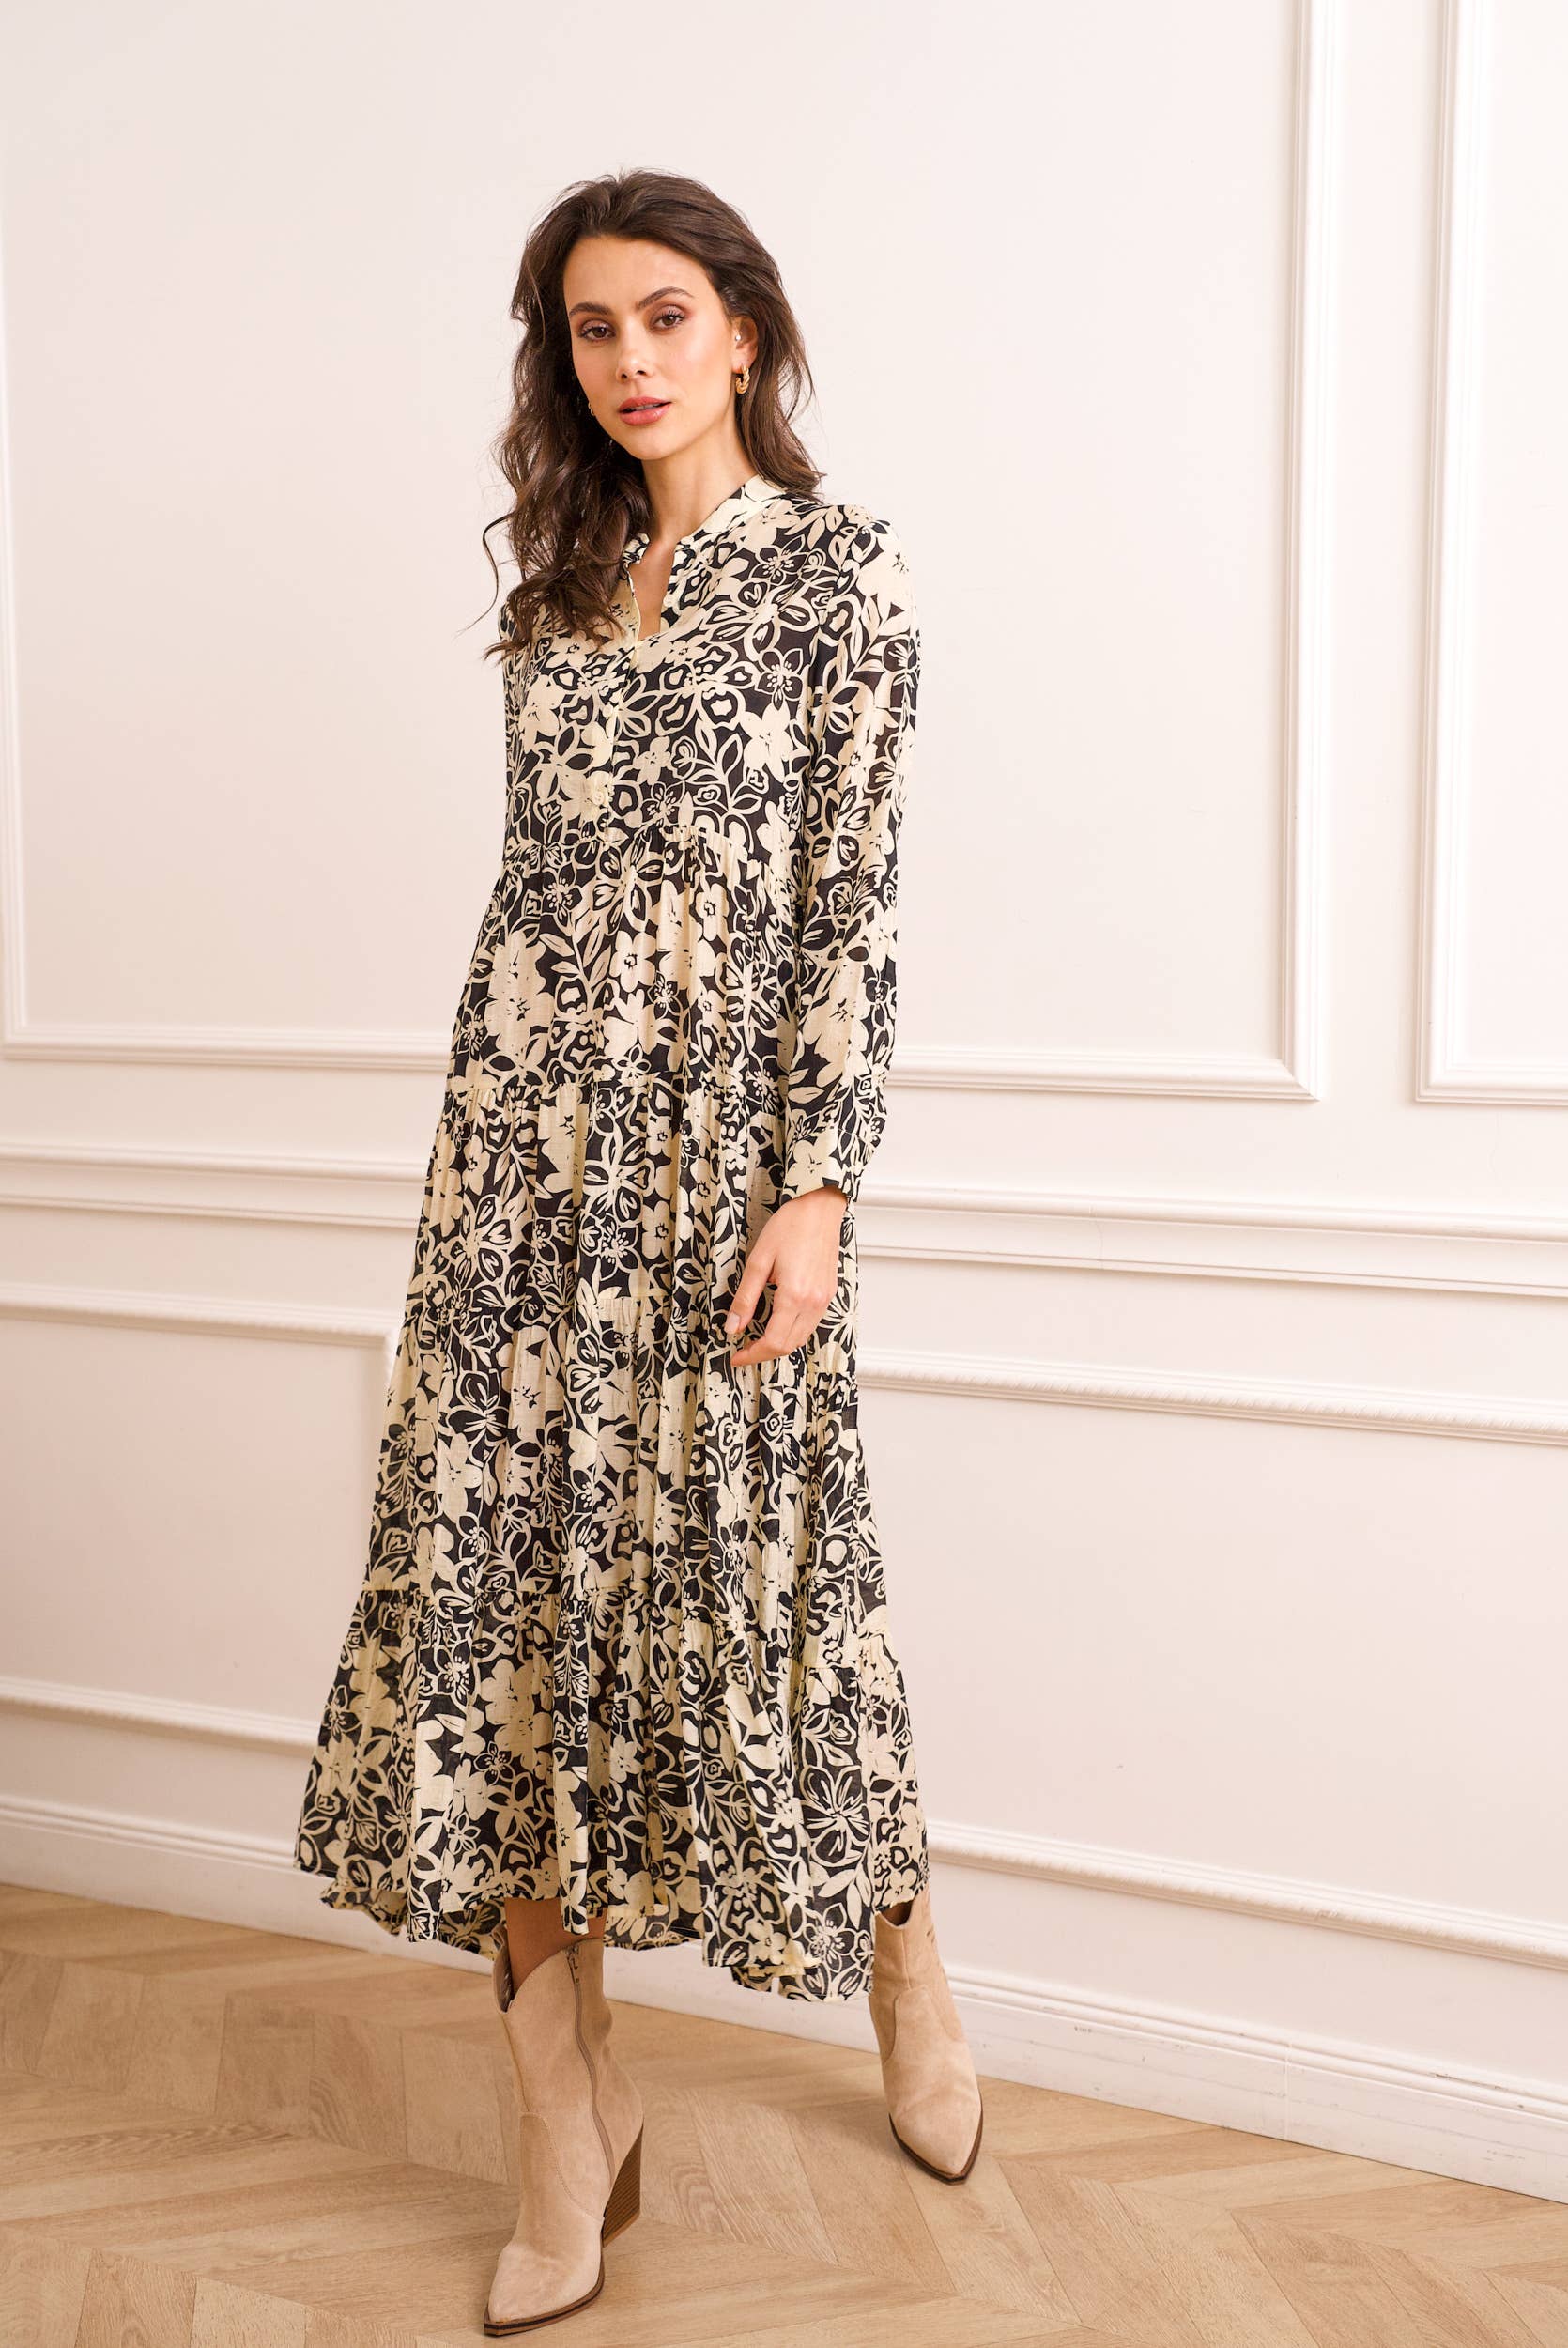 Marbella floral printed silk dress (S-M-L-XL) - CK08112 - Out of the Blue